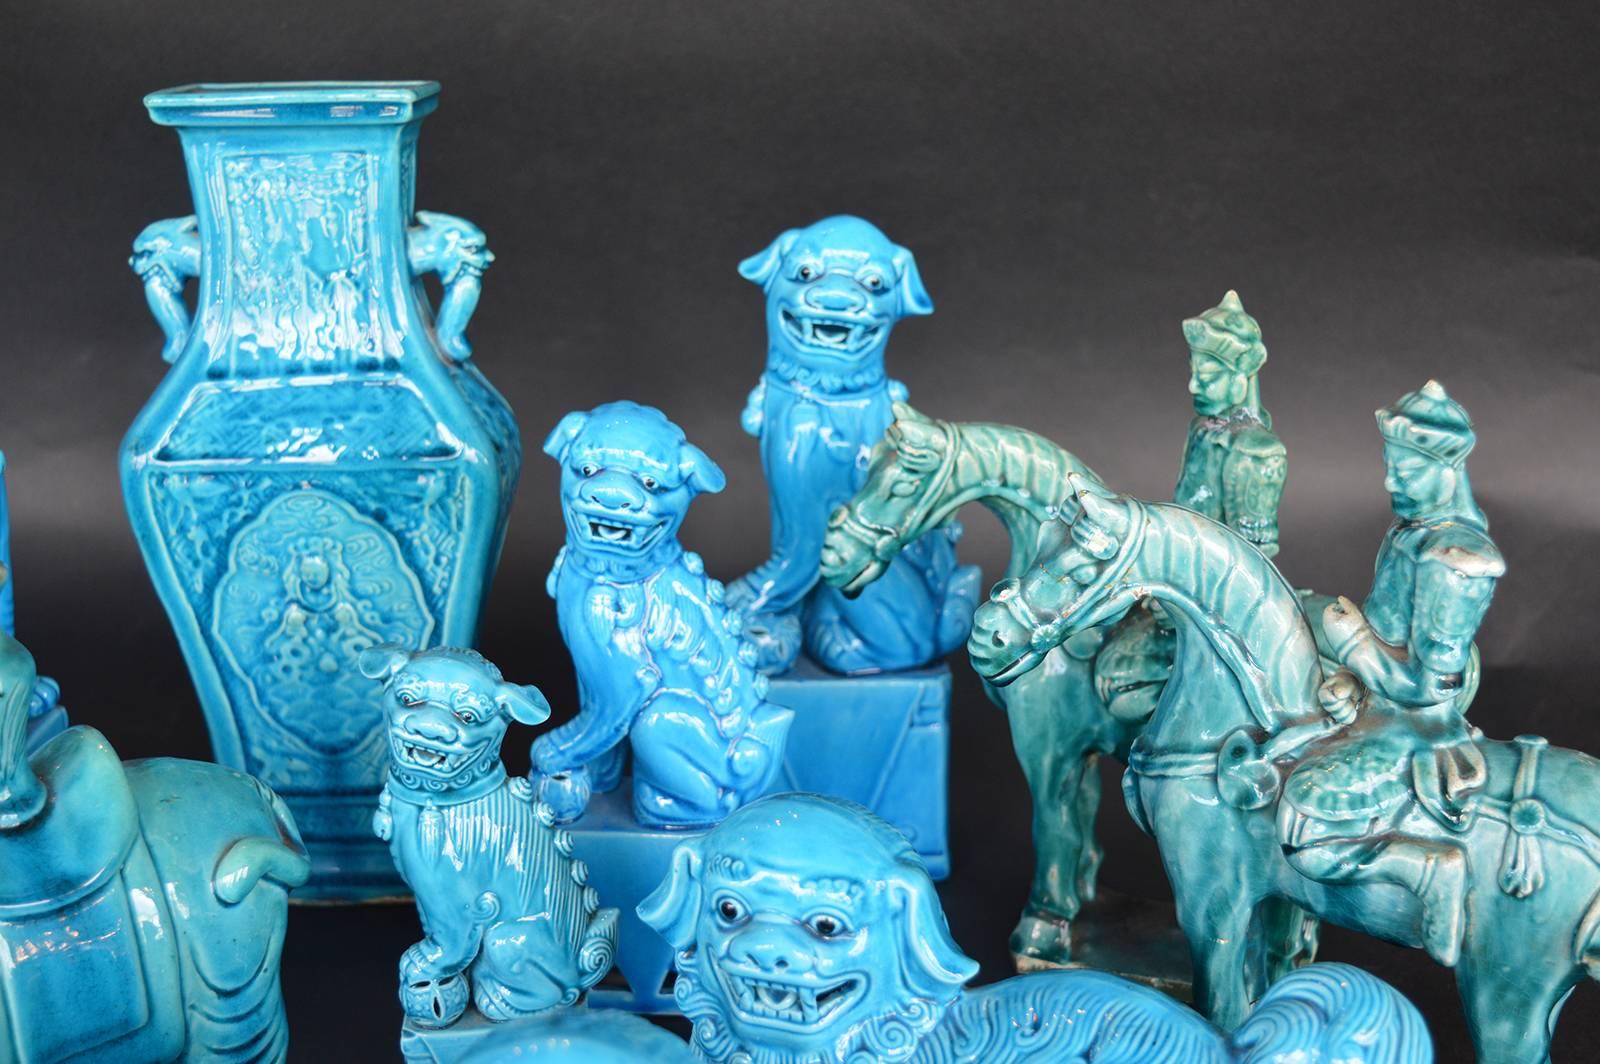 Collection of turquoise foo dogs, elephants, horses and immortals with a pair of bookends set in brass and a vase. The age of the pieces vary, the more yellowed pieces are older and the more vibrant blue pieces are newer.